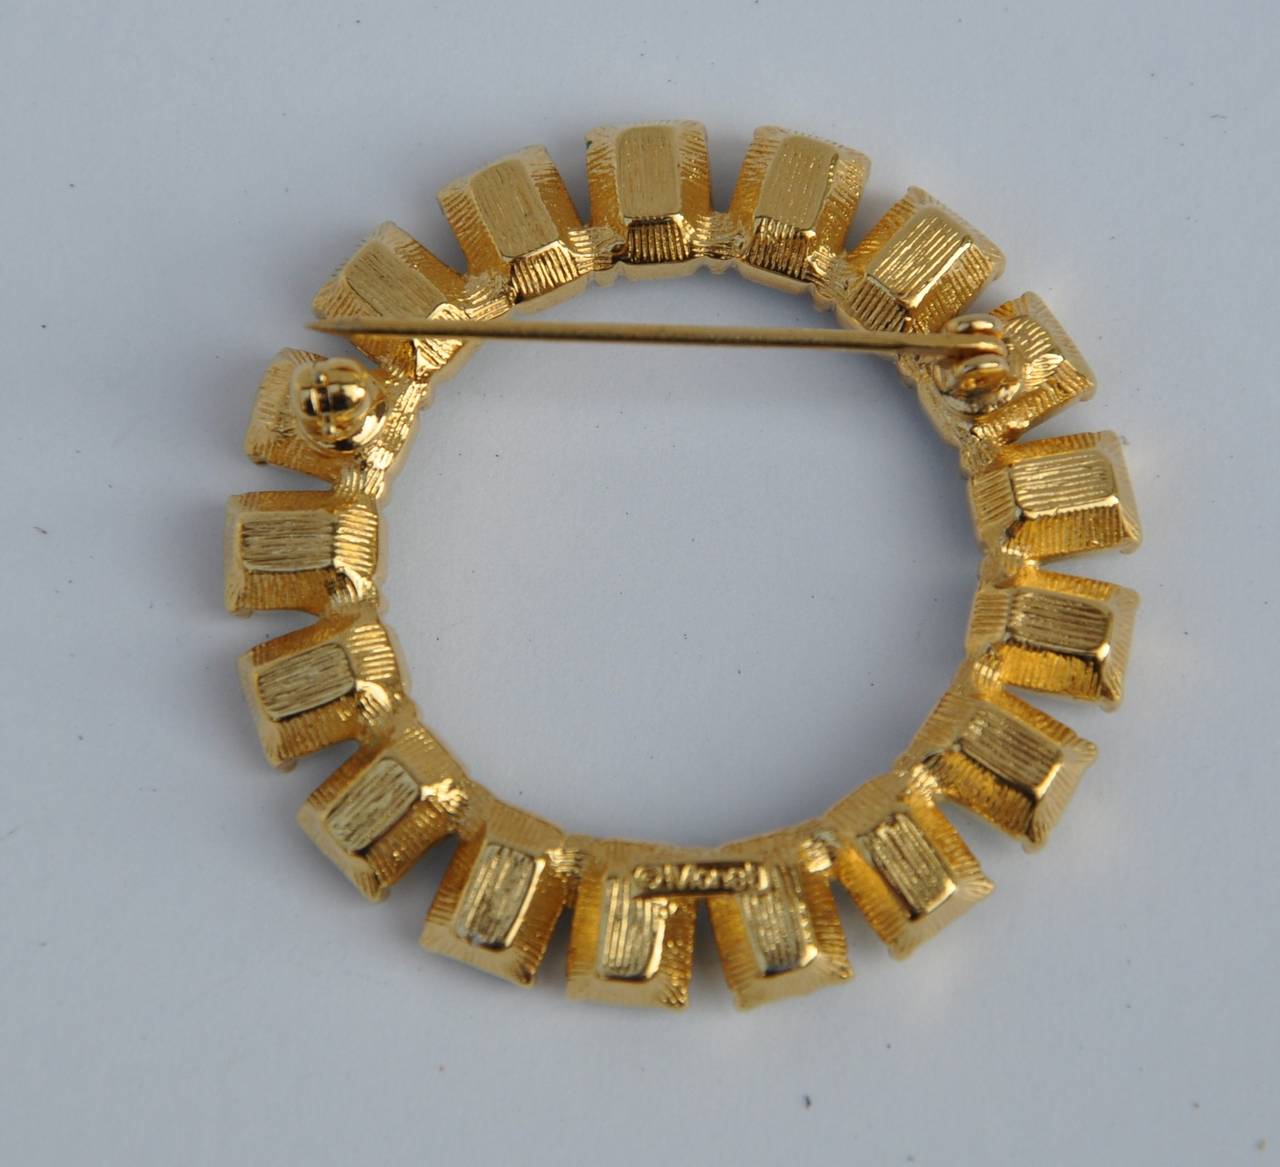 Monet's circular gilded gold with "emerald" rhinestone brooch measures 1 1/2" in height and 1 1/2" in width. Depth is 3/8". Brooch is signed on the backside.